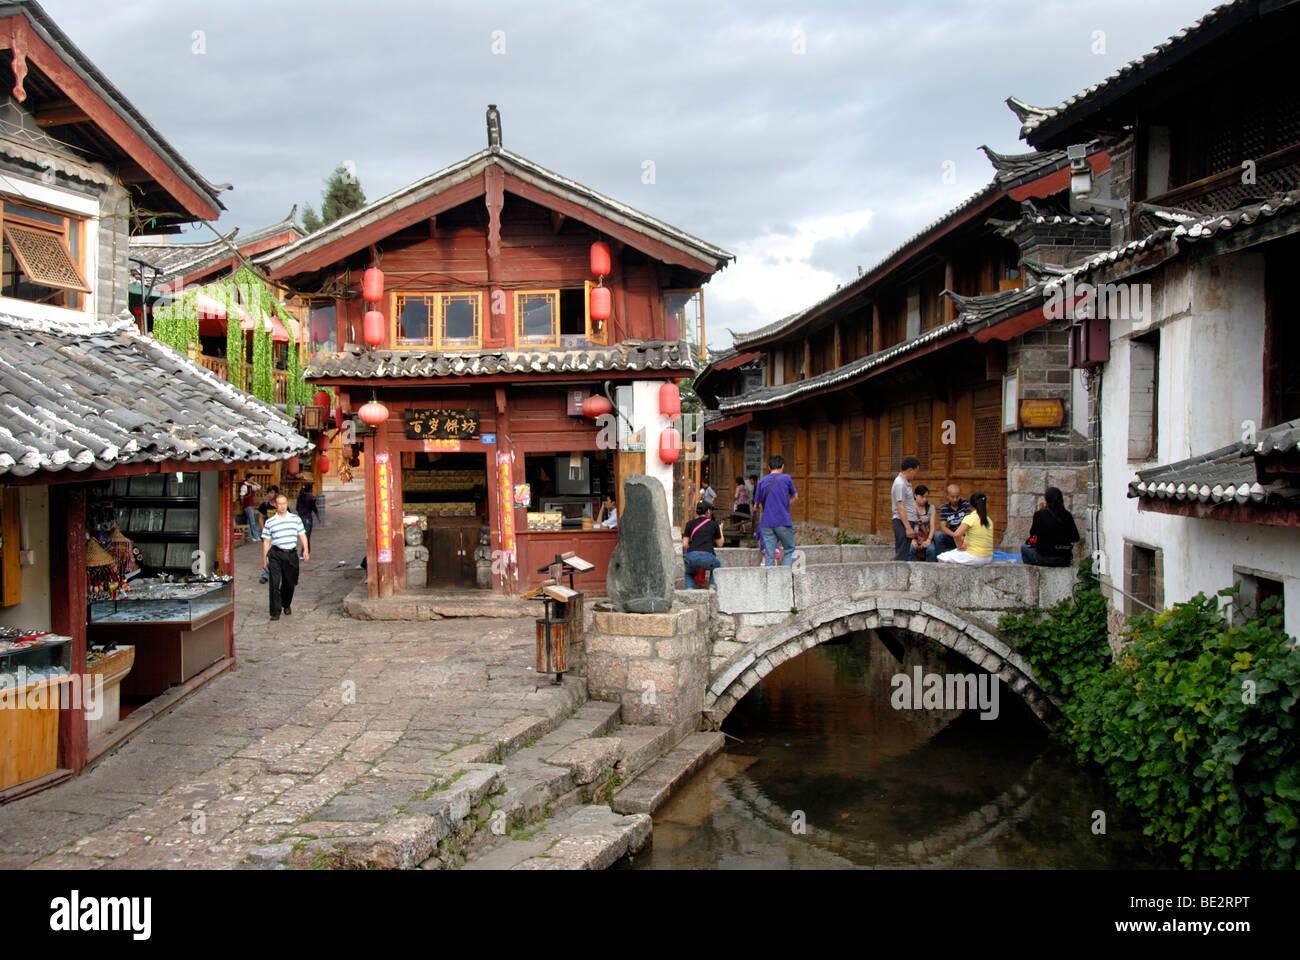 Old wooden houses, canal and bridge, historic centre of Lijiang, UNESCO World Heritage Site, Yunnan Province, People's Republic Stock Photo